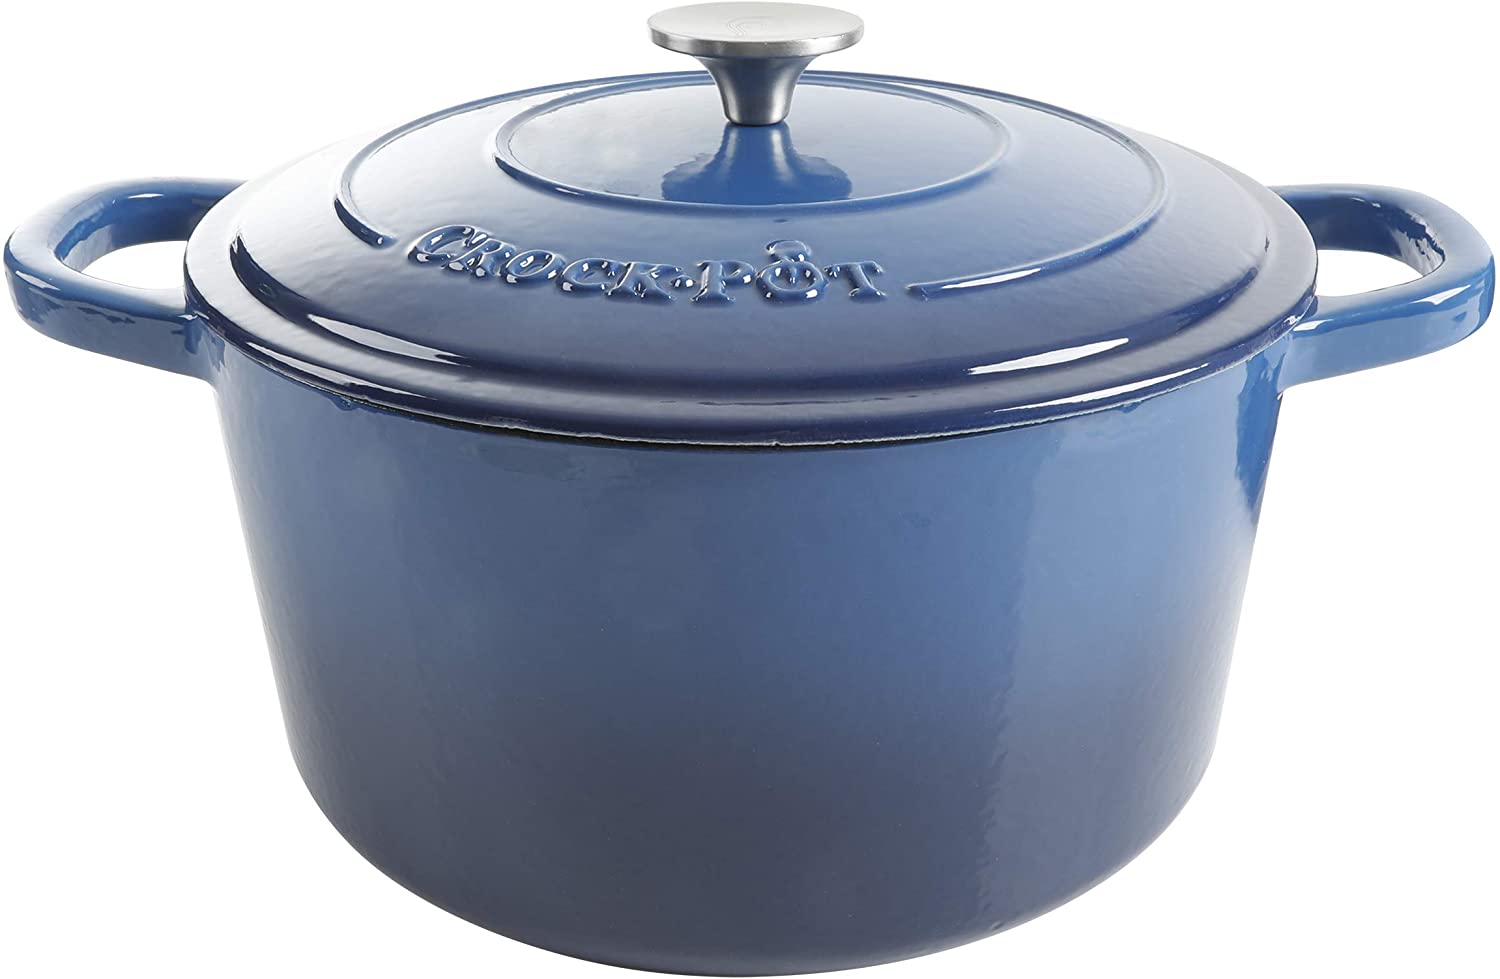 COOKWIN Enameled Cast Iron Dutch Oven, 5 qt Bread Baking Pot with Self Basting Lid, Non-Stick Enamel Coated Cookware Pot, Great Christmas Gifts for